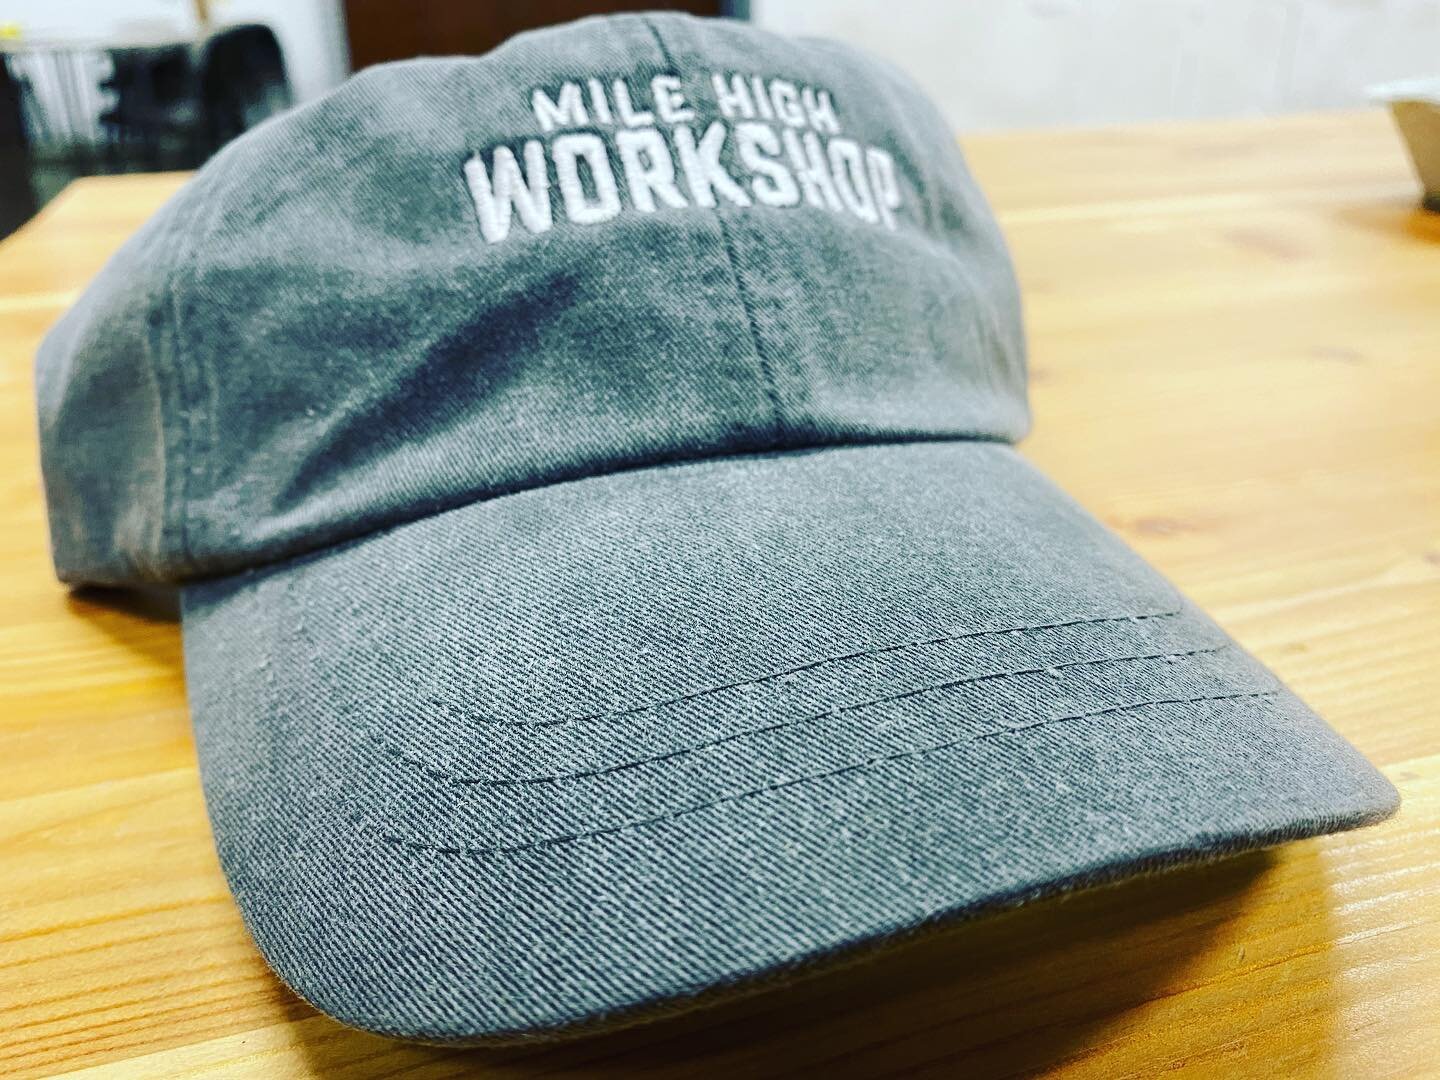 It only took us 7 years but we finally made WorkShop hats! Thanks to our friends @asmallprintshop for making it happen🎉